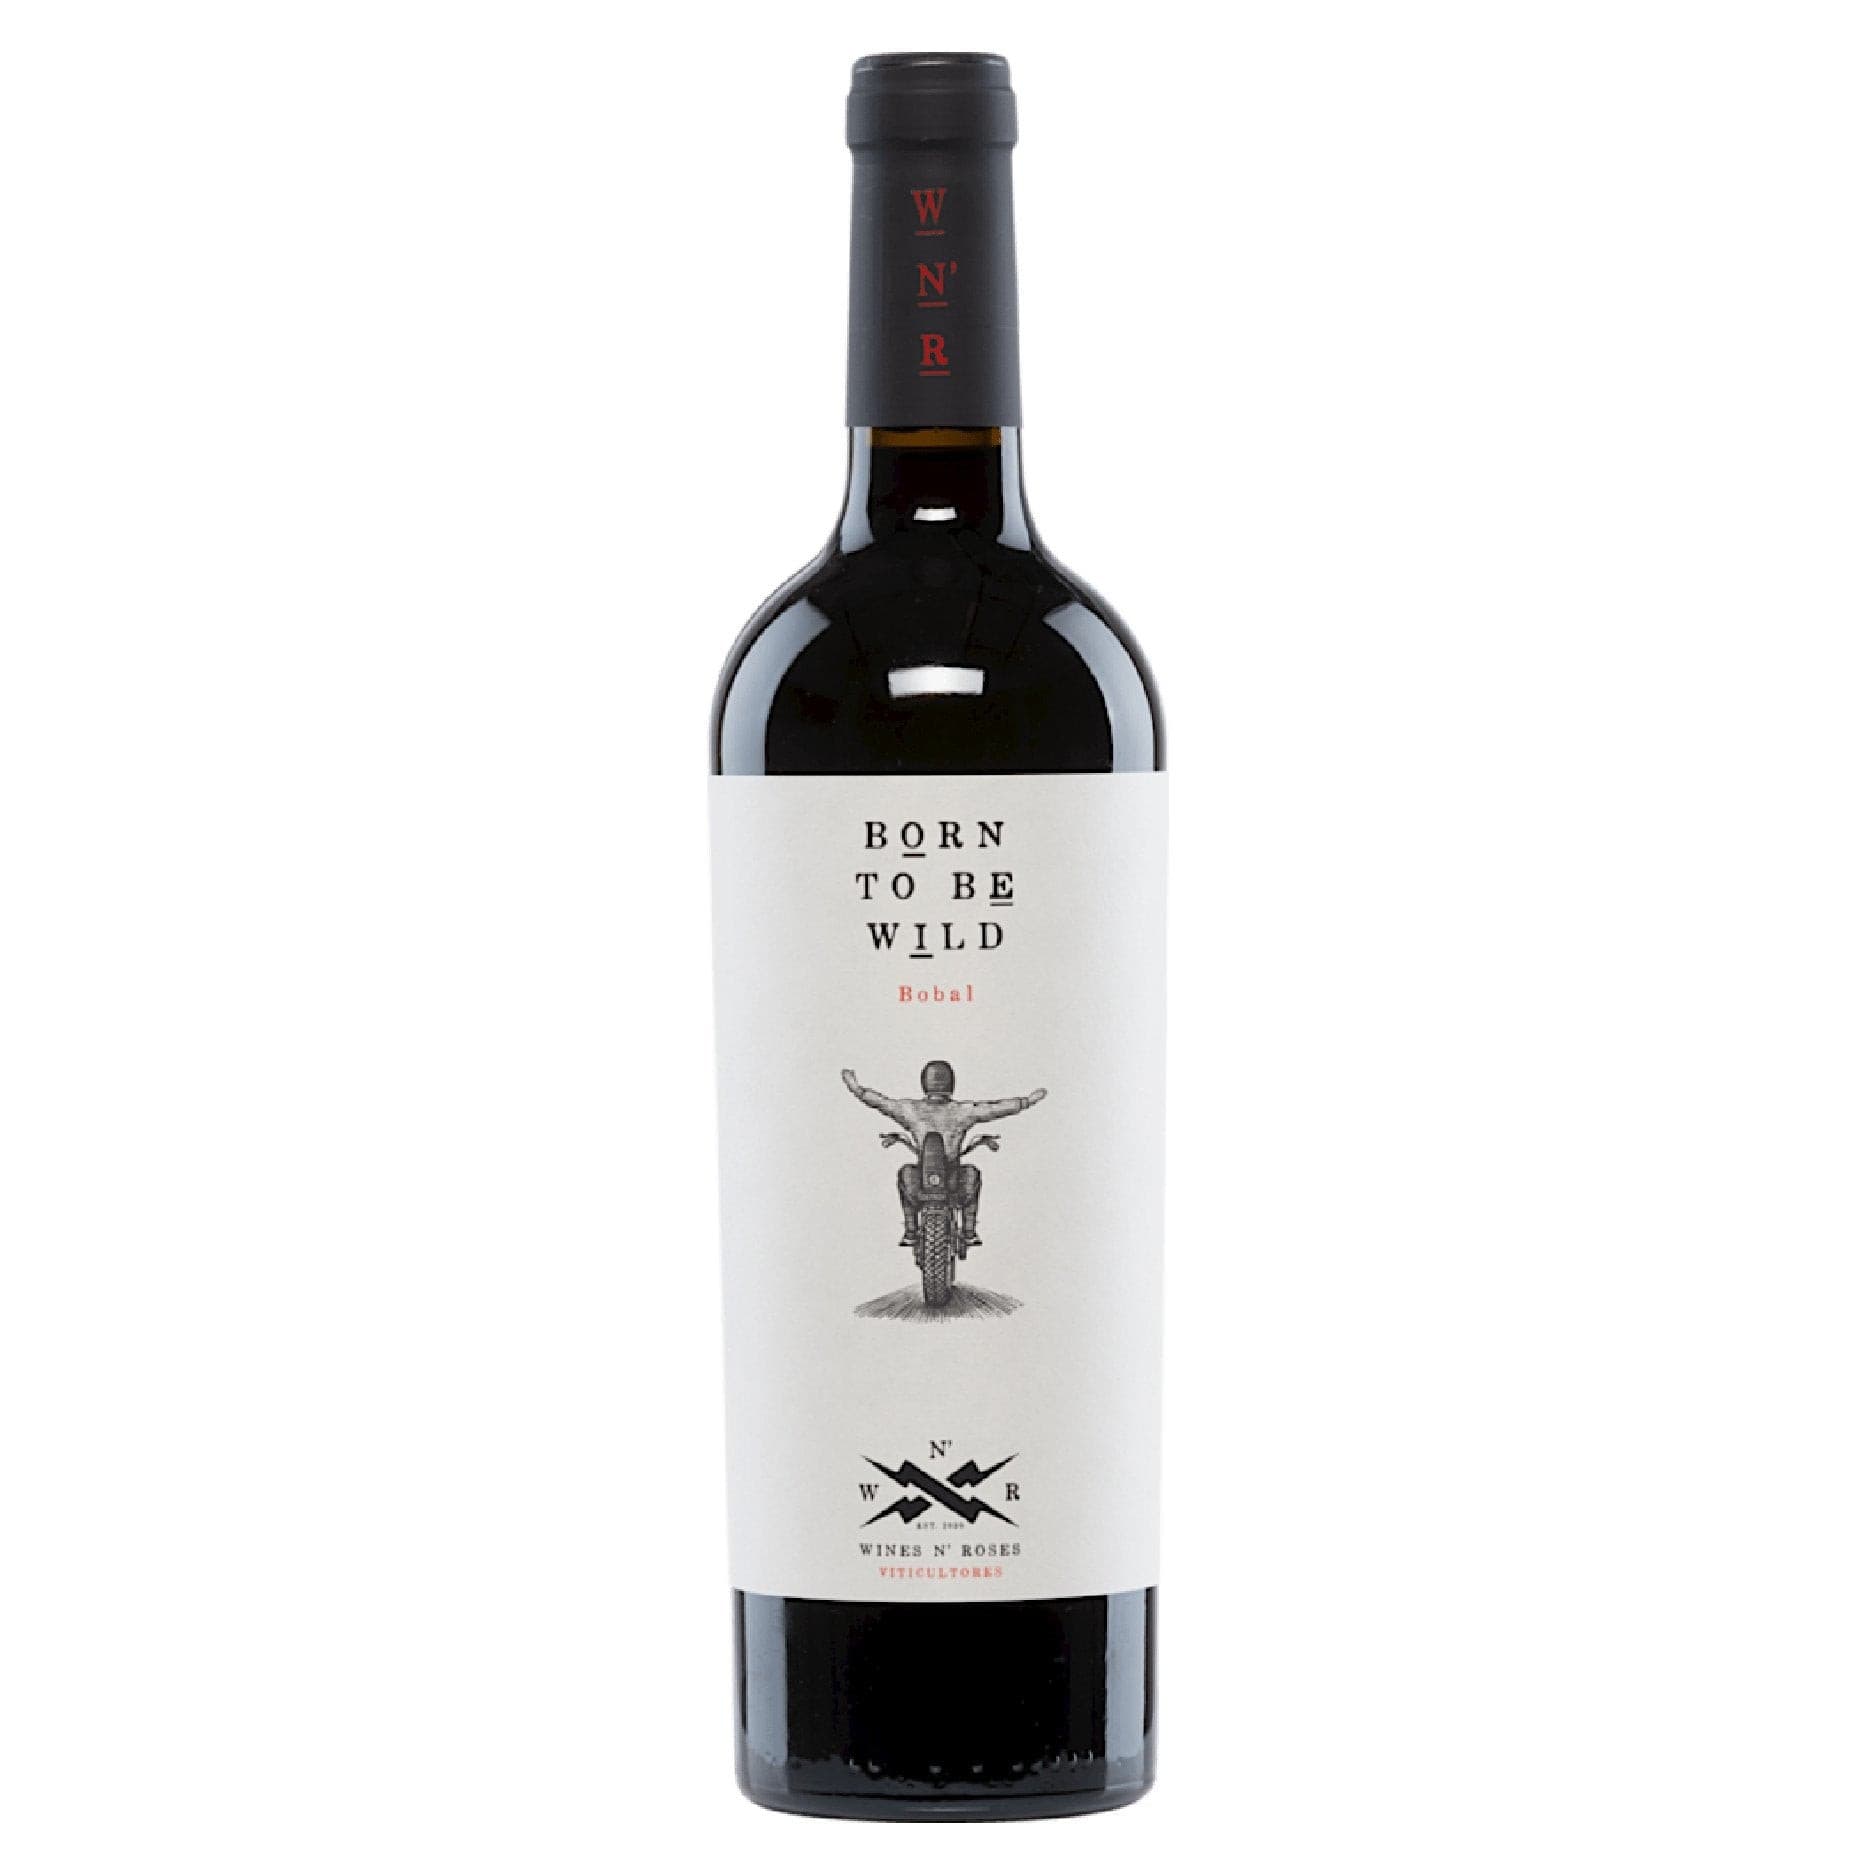 Born to be Wild Tinto 2020 - Wines N Roses Viticultores - Weingaumen.com